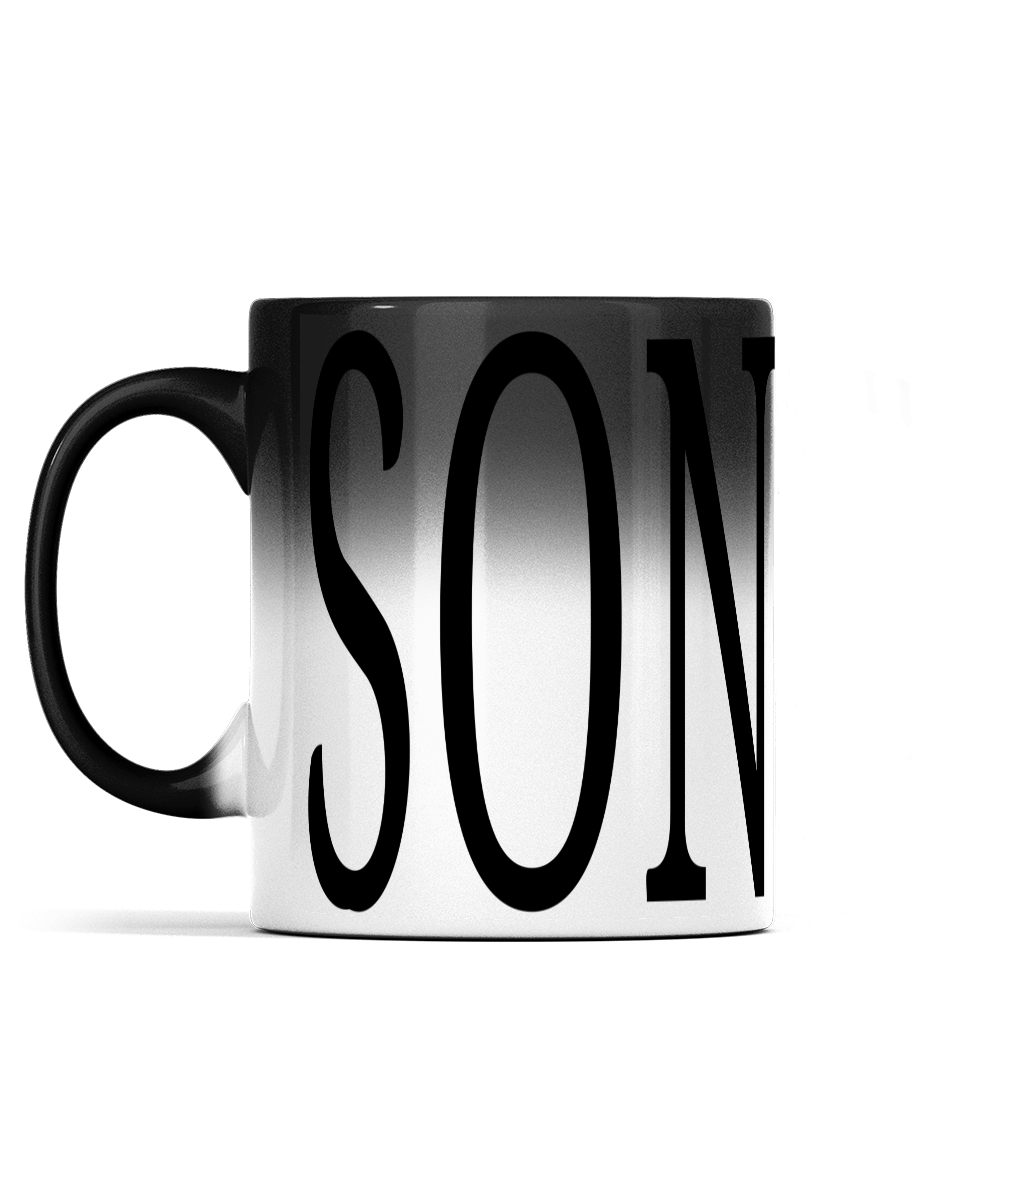 11oz SON Colour Changing Mug For Tea, Coffee Or Hot Drinks Black Colour When Cold SON Appears And Turns To White Ceramic Tea Cup When Warm